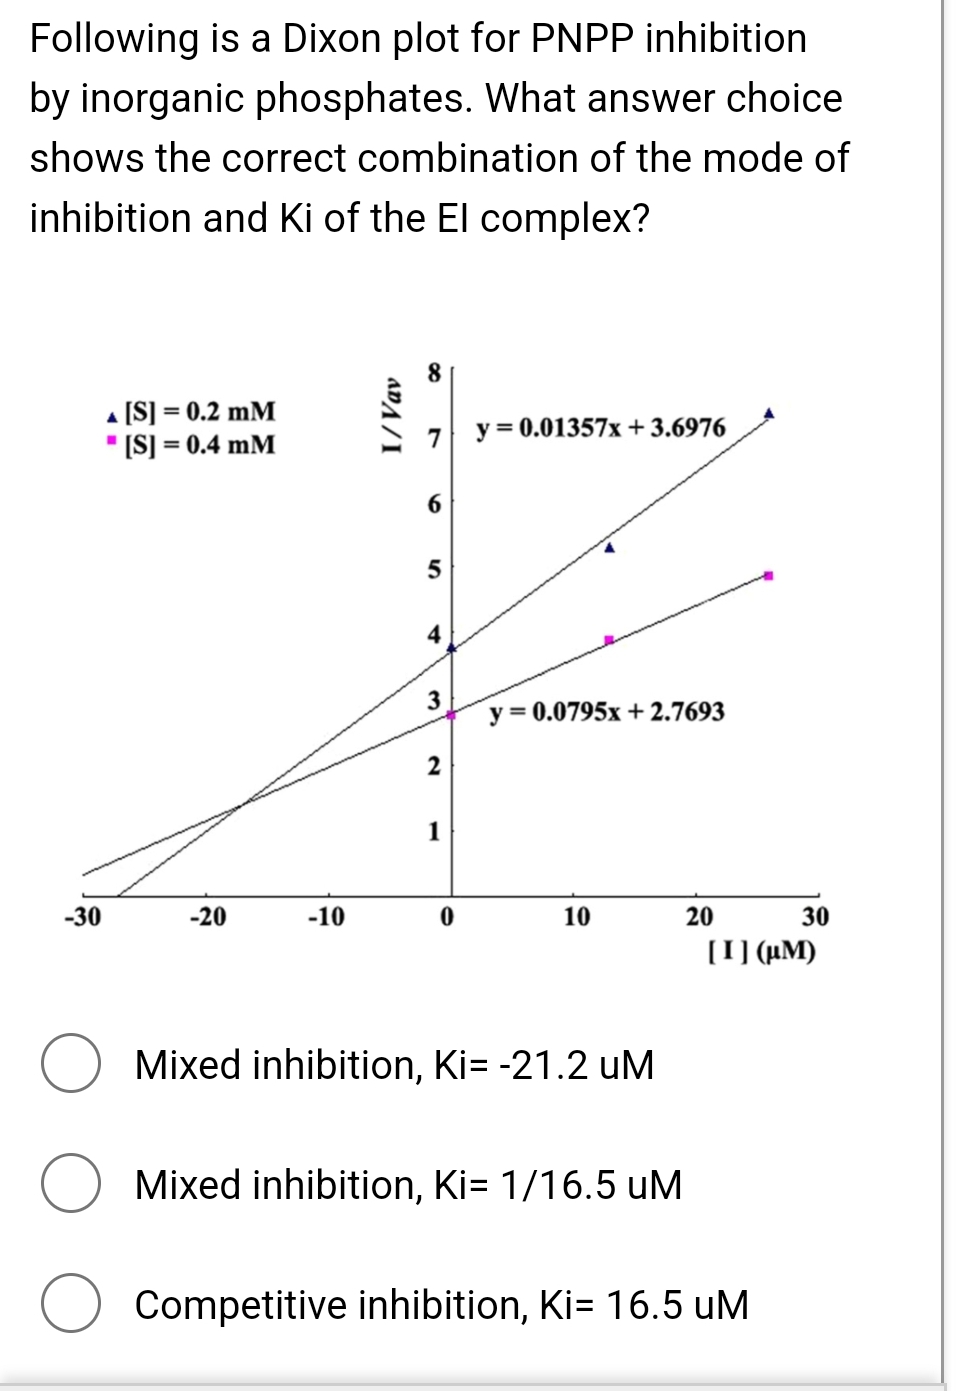 Following is a Dixon plot for PNPP inhibition
by inorganic phosphates. What answer choice
shows the correct combination of the mode of
inhibition and Ki of the El complex?
[S] = 0.2 mM
"[S] = 0.4 mM
I/Vav
8
7
y=0.01357x+3.6976
6
10
5
4
3
2
1
y=0.0795x+2.7693
-30
-20
-10
0
10
20
30
[I](M)
Mixed inhibition, Ki= -21.2 UM
Mixed inhibition, Ki= 1/16.5 uM
Competitive inhibition, Ki= 16.5 UM